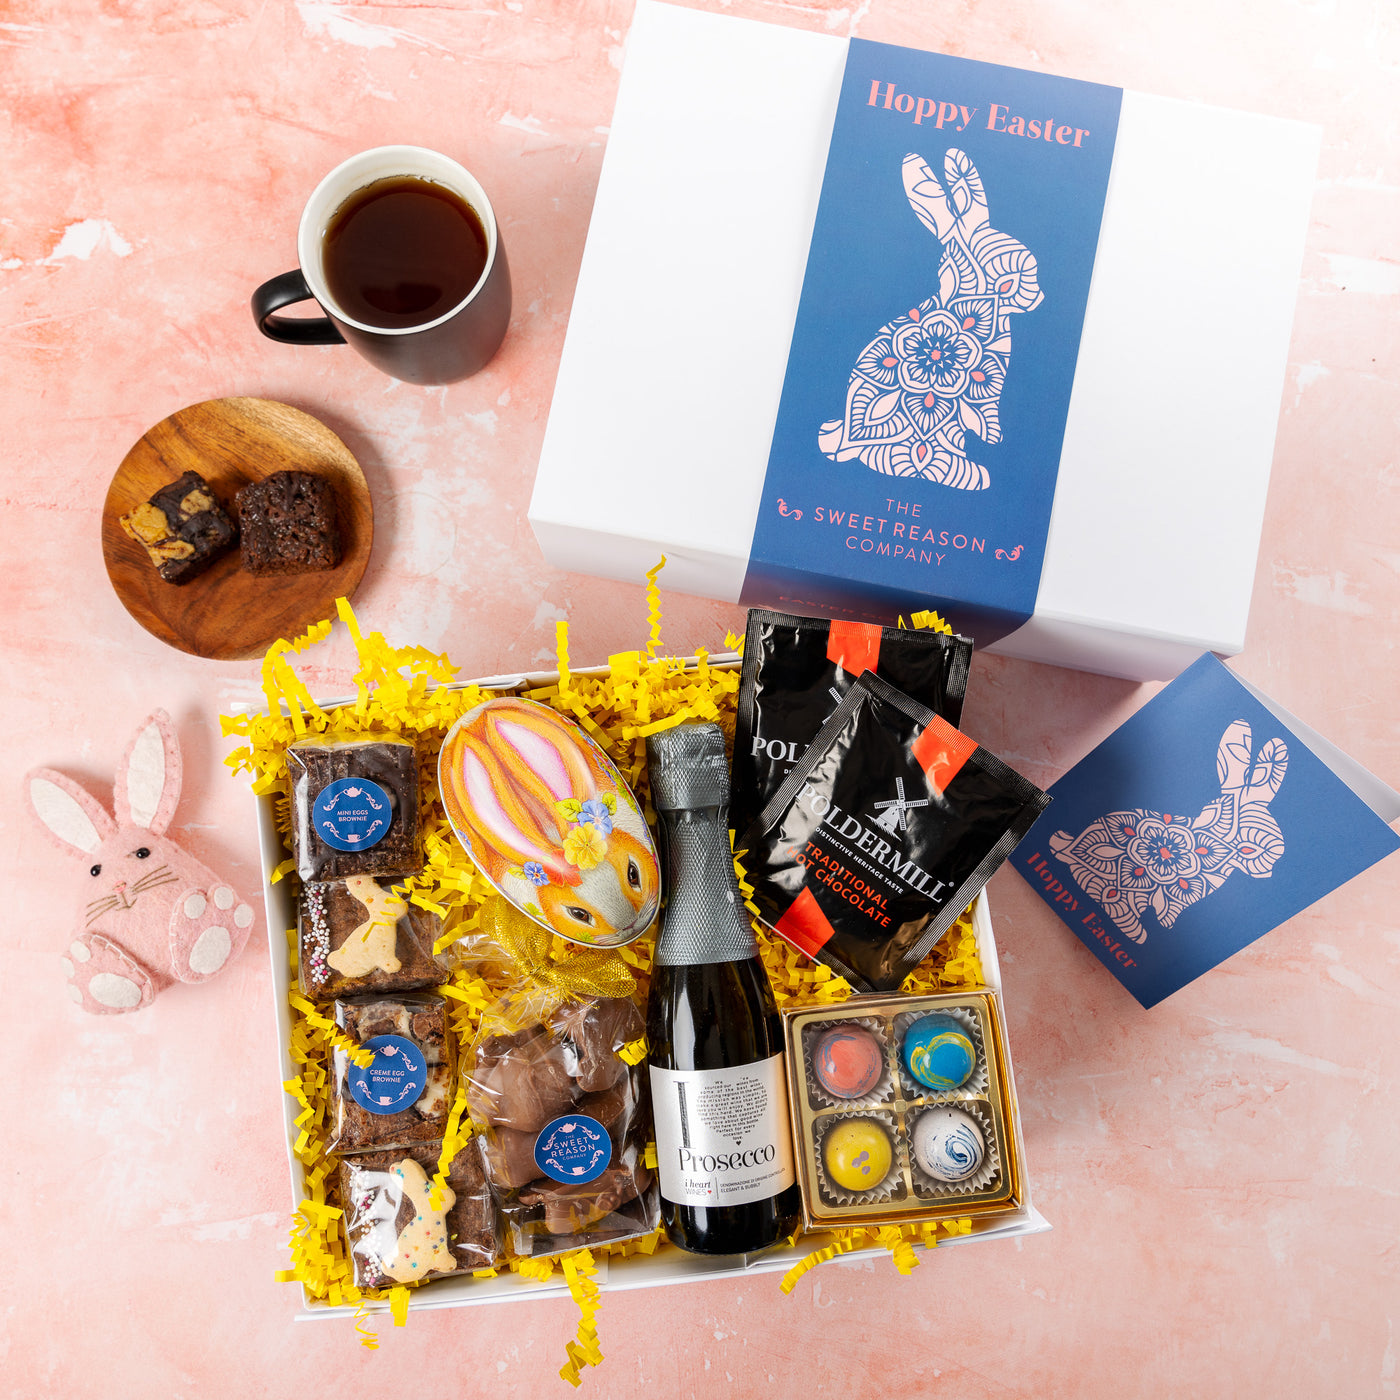 Prosecco and Chocolate Easter Hamper